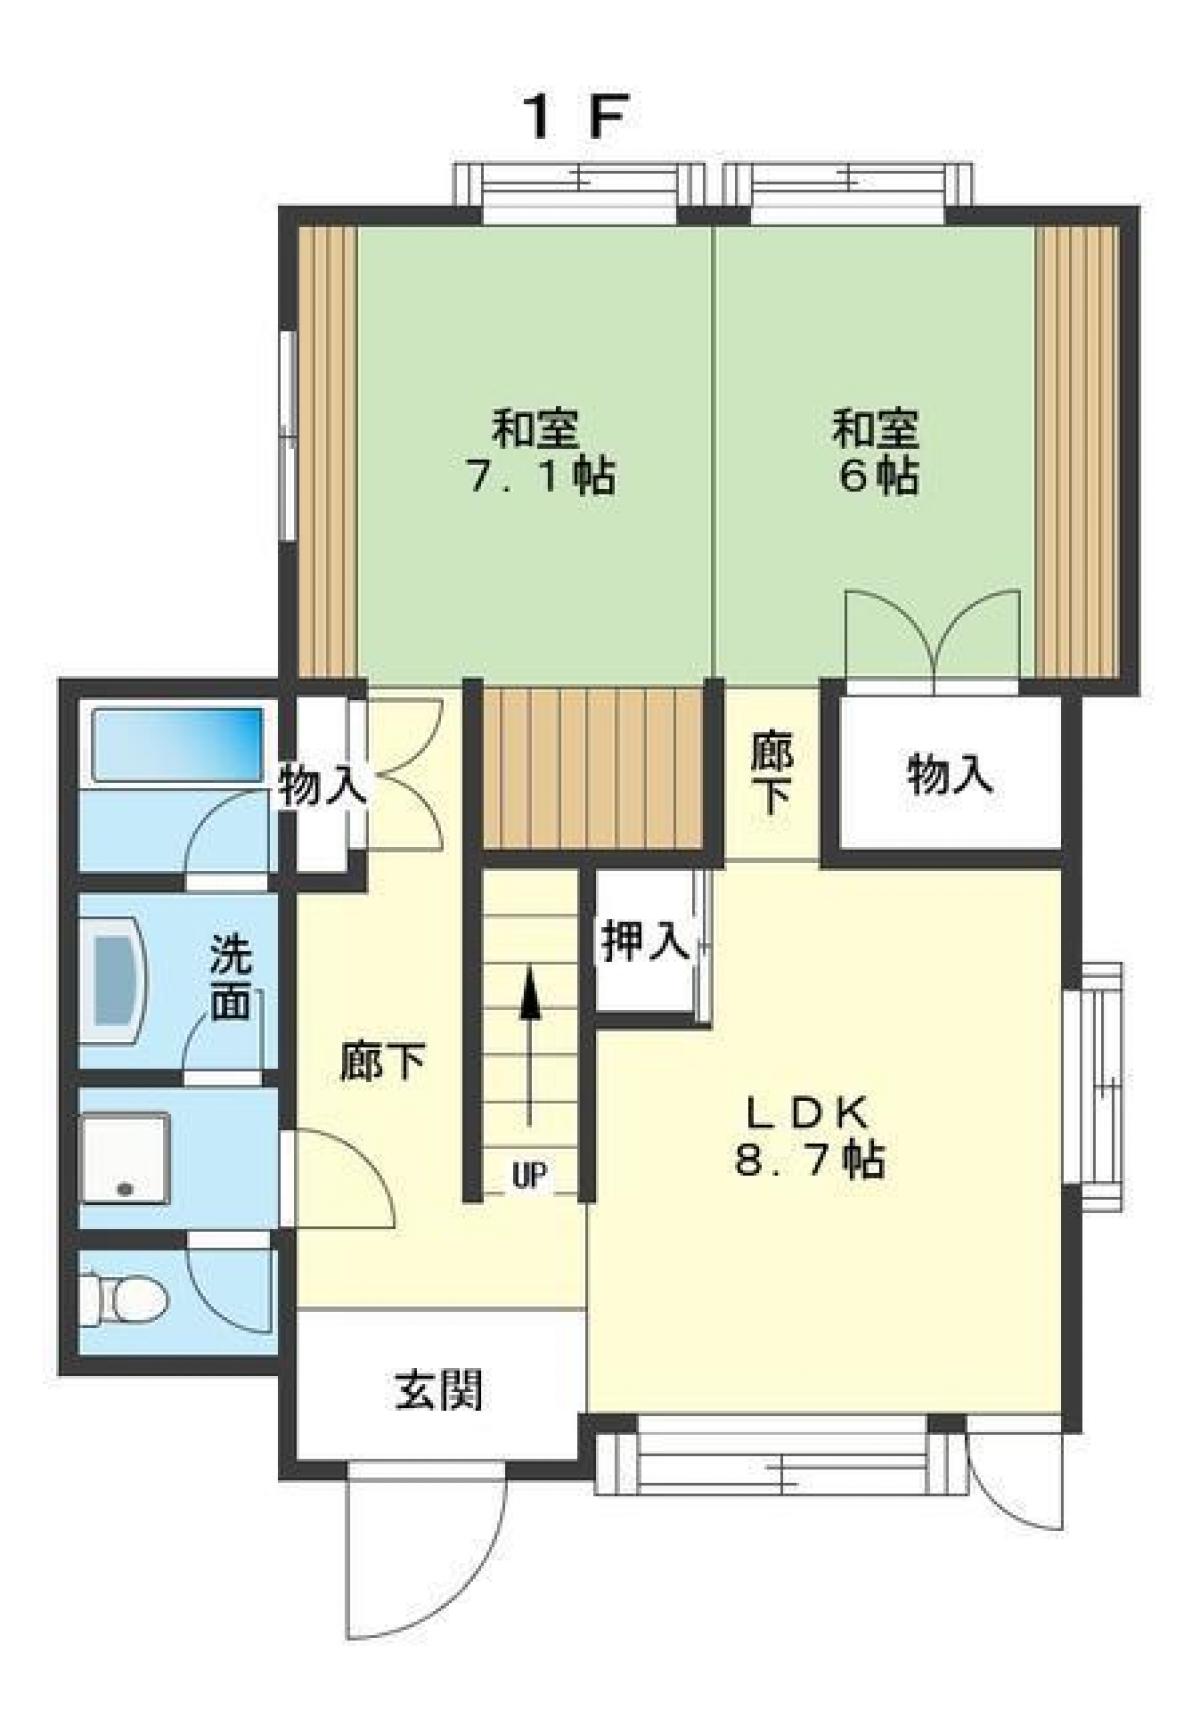 Picture of Home For Sale in Naha Shi, Okinawa, Japan